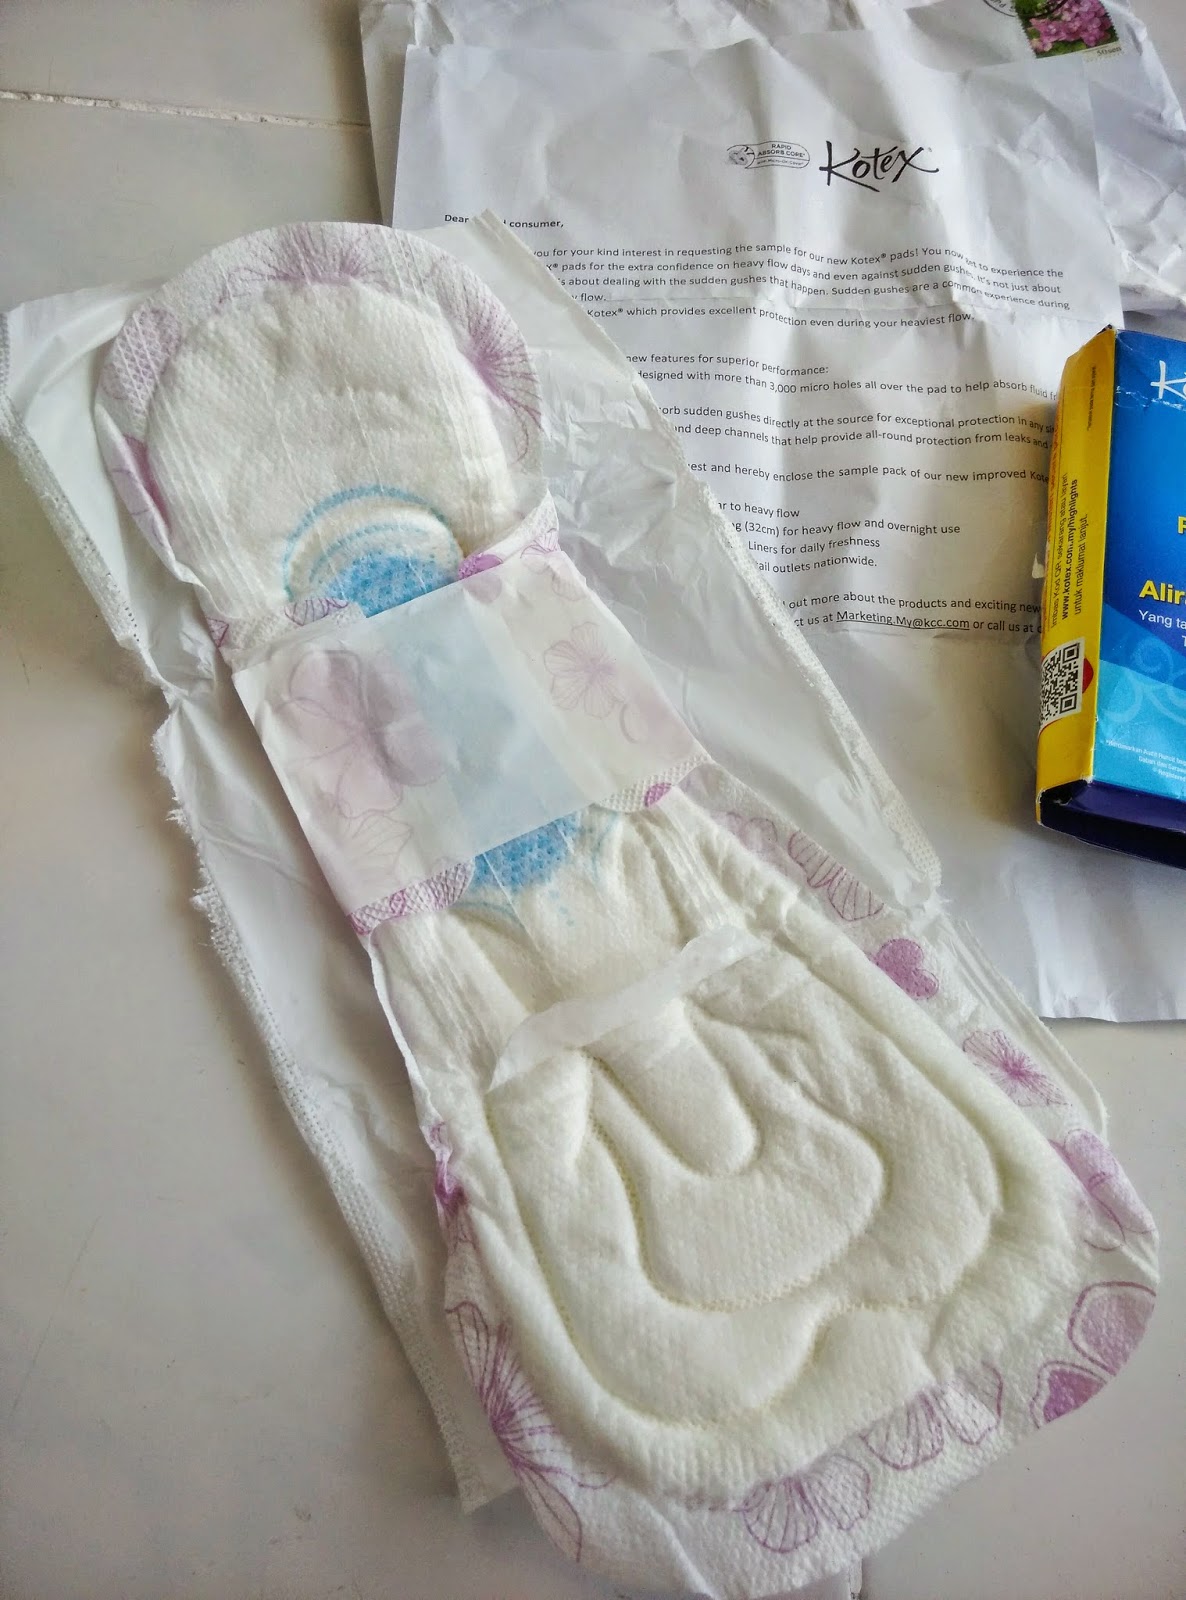 Potato Queen travel and lifestyle: Review: New Improved Kotex Pads